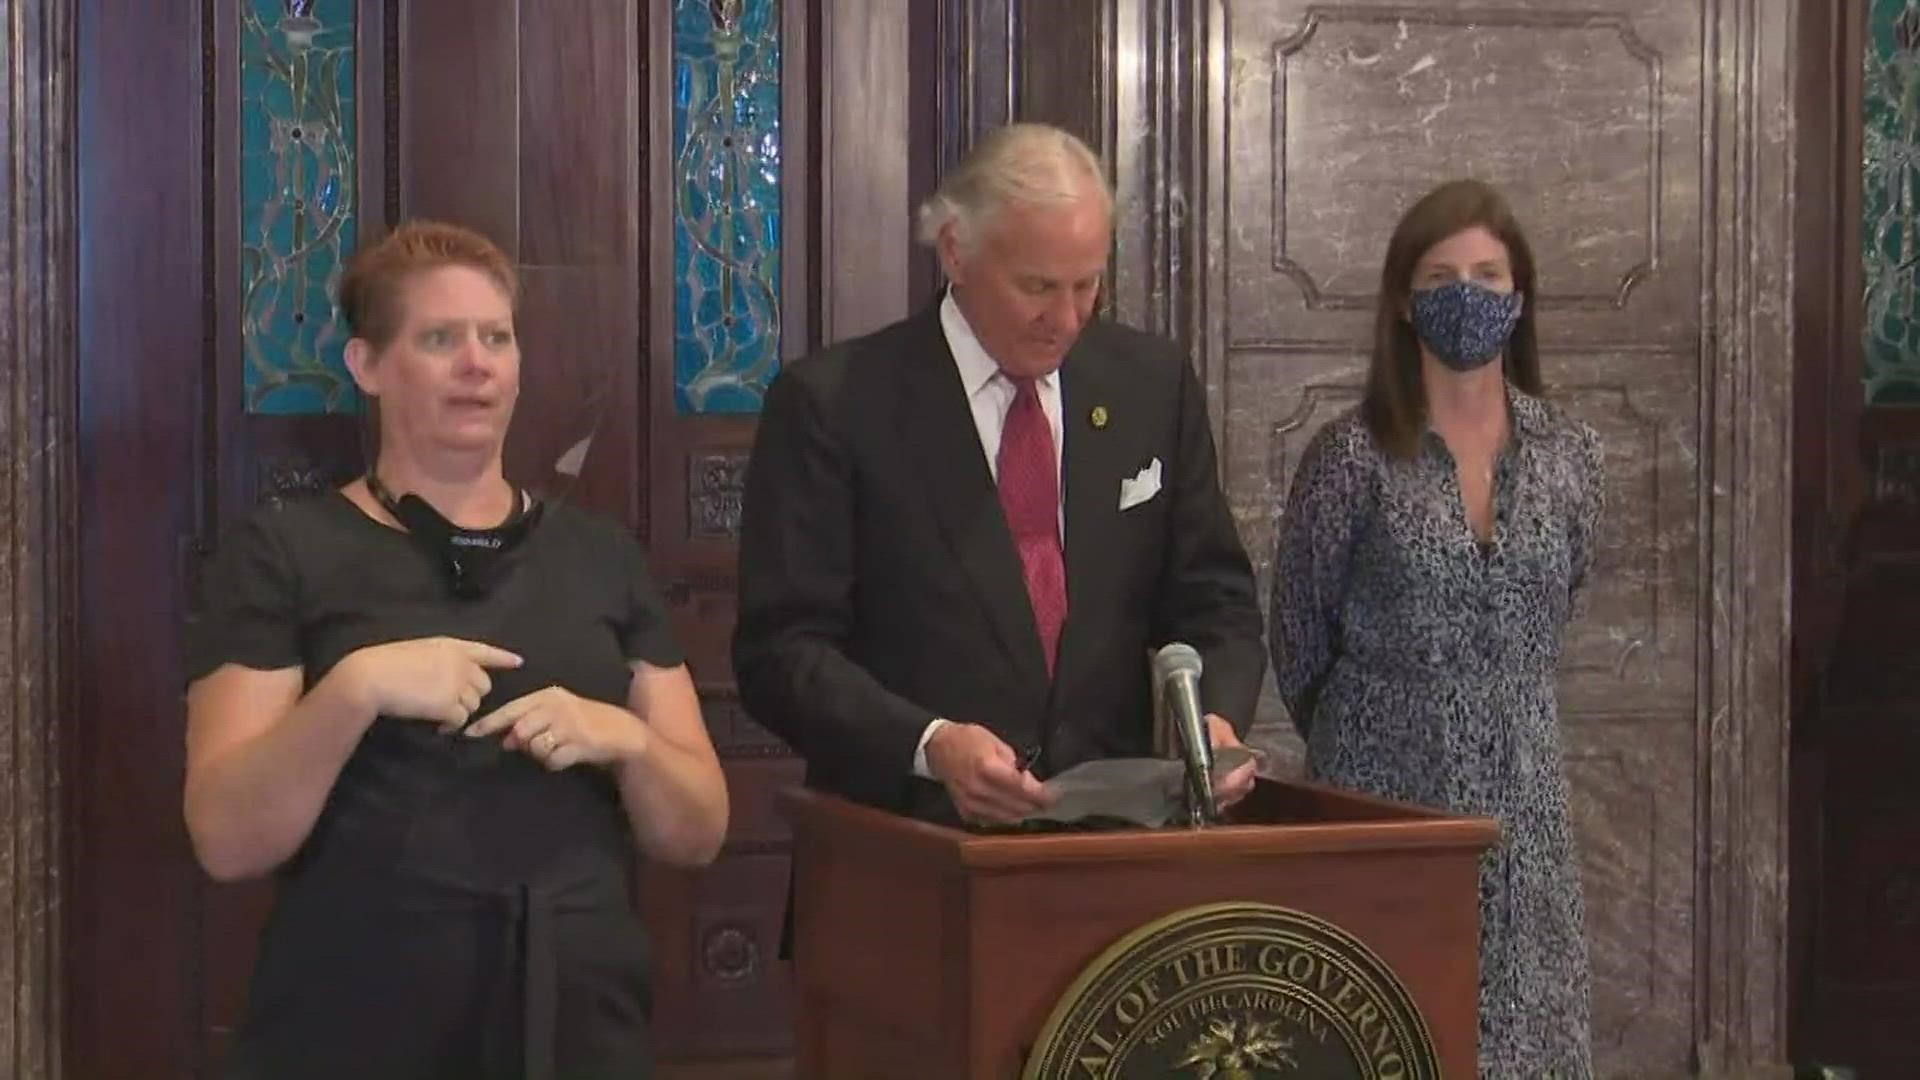 SC Governor Henry McMaster and state health leaders have announced plans for limited outdoor visitation to take place again at nursing homes in the state.